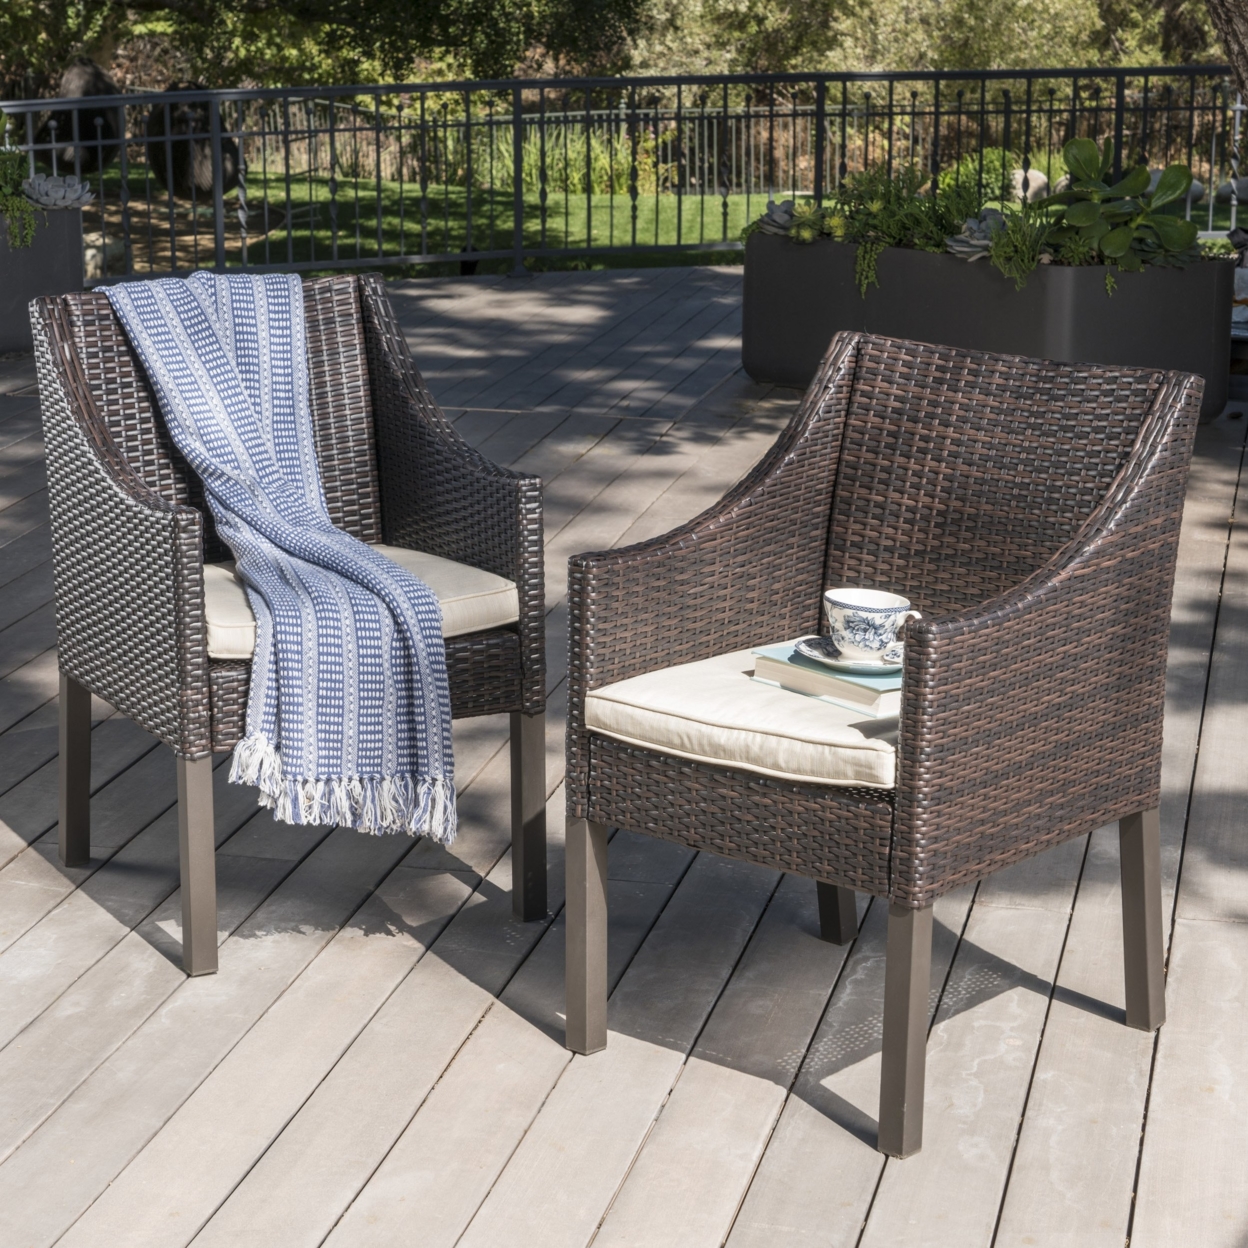 Antioch Outdoor Wicker Dining Chairs With Water Resistant Cushions (Set Of 2) - Gray/Silver